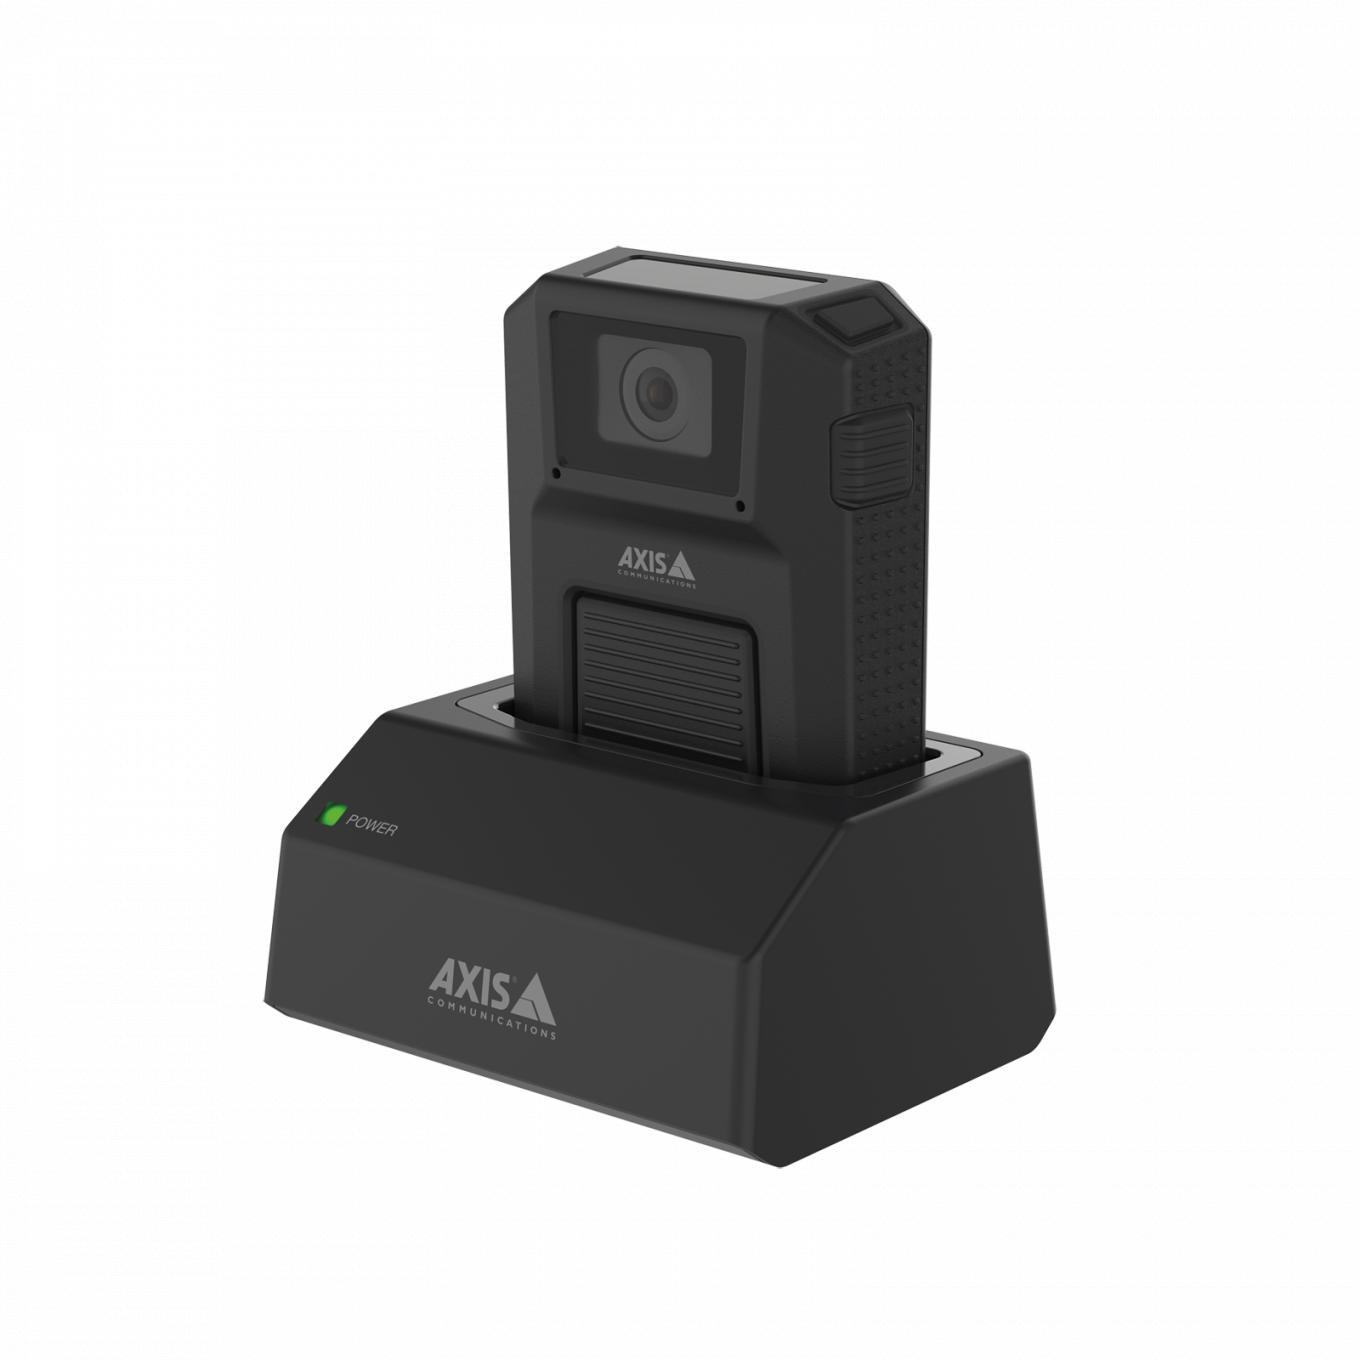 AXIS W700 Docking station 1-bay from left with AXIS W100 body worn camera